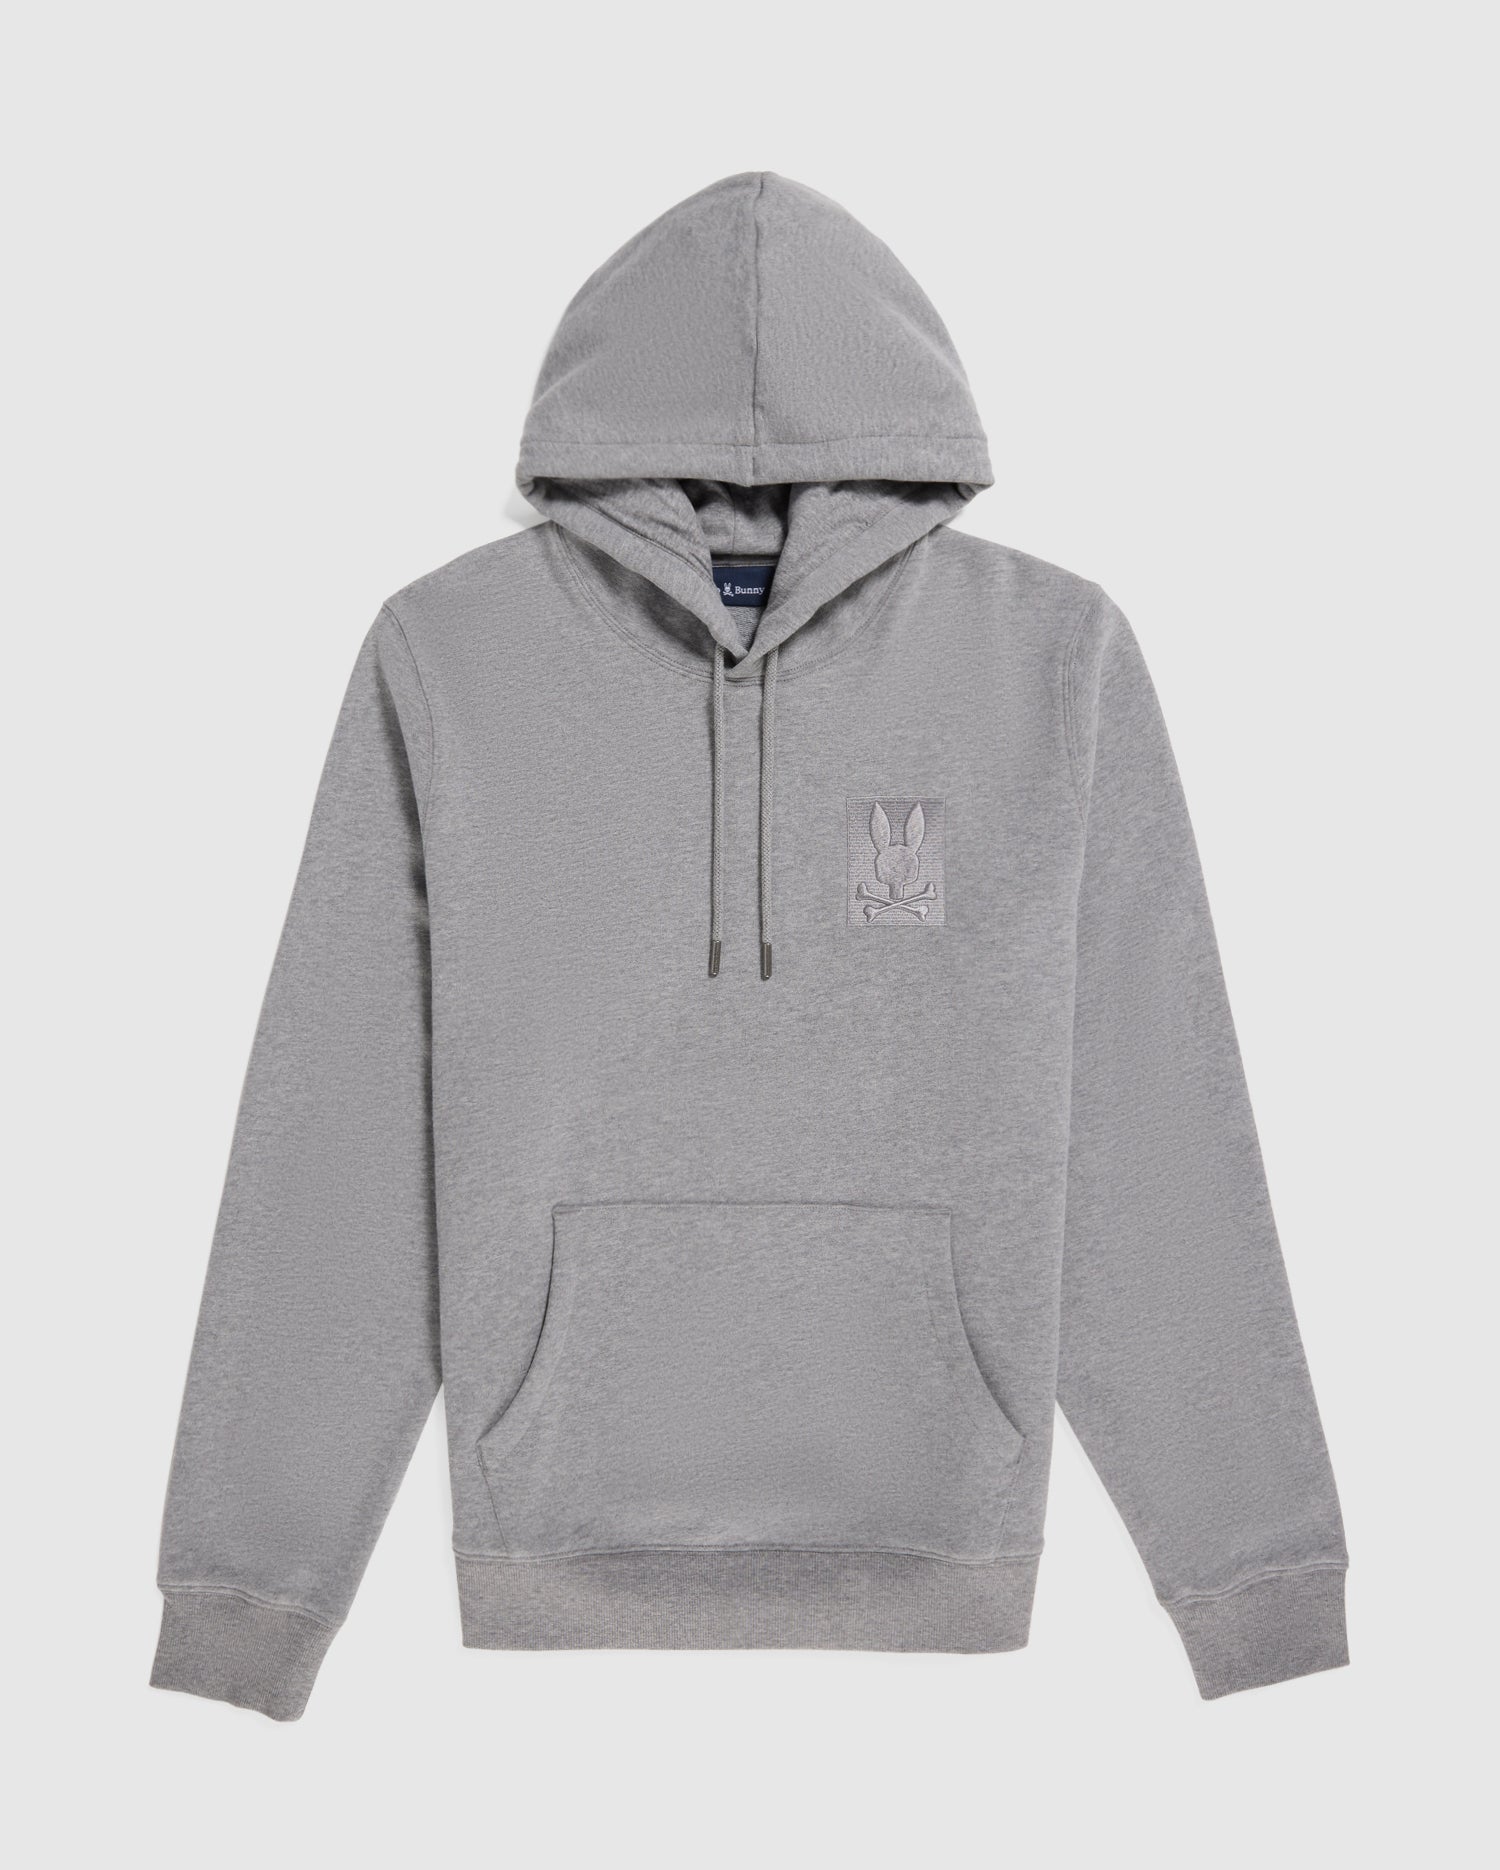 The Monogram Zip Hoodie in Silver/Bright White, Size XS/Small